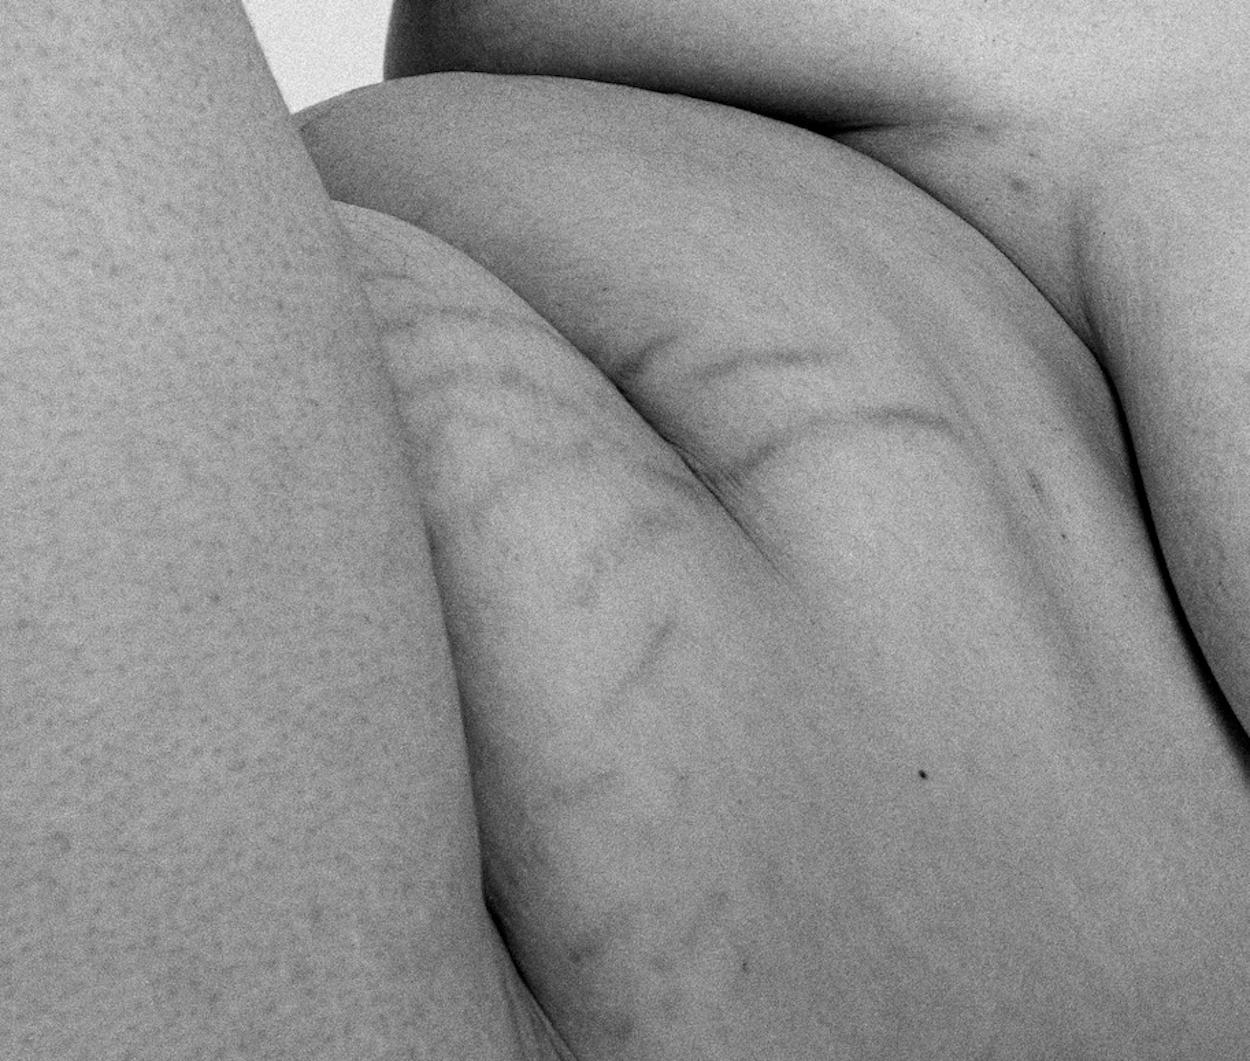 These photographs explore tonality, texture, mass and depth in context of the human figure. 

This photograph was made in studio in Seoul, South Korea. 

These figure studies intend to explore and demonstrate the shapes and patterns of the human